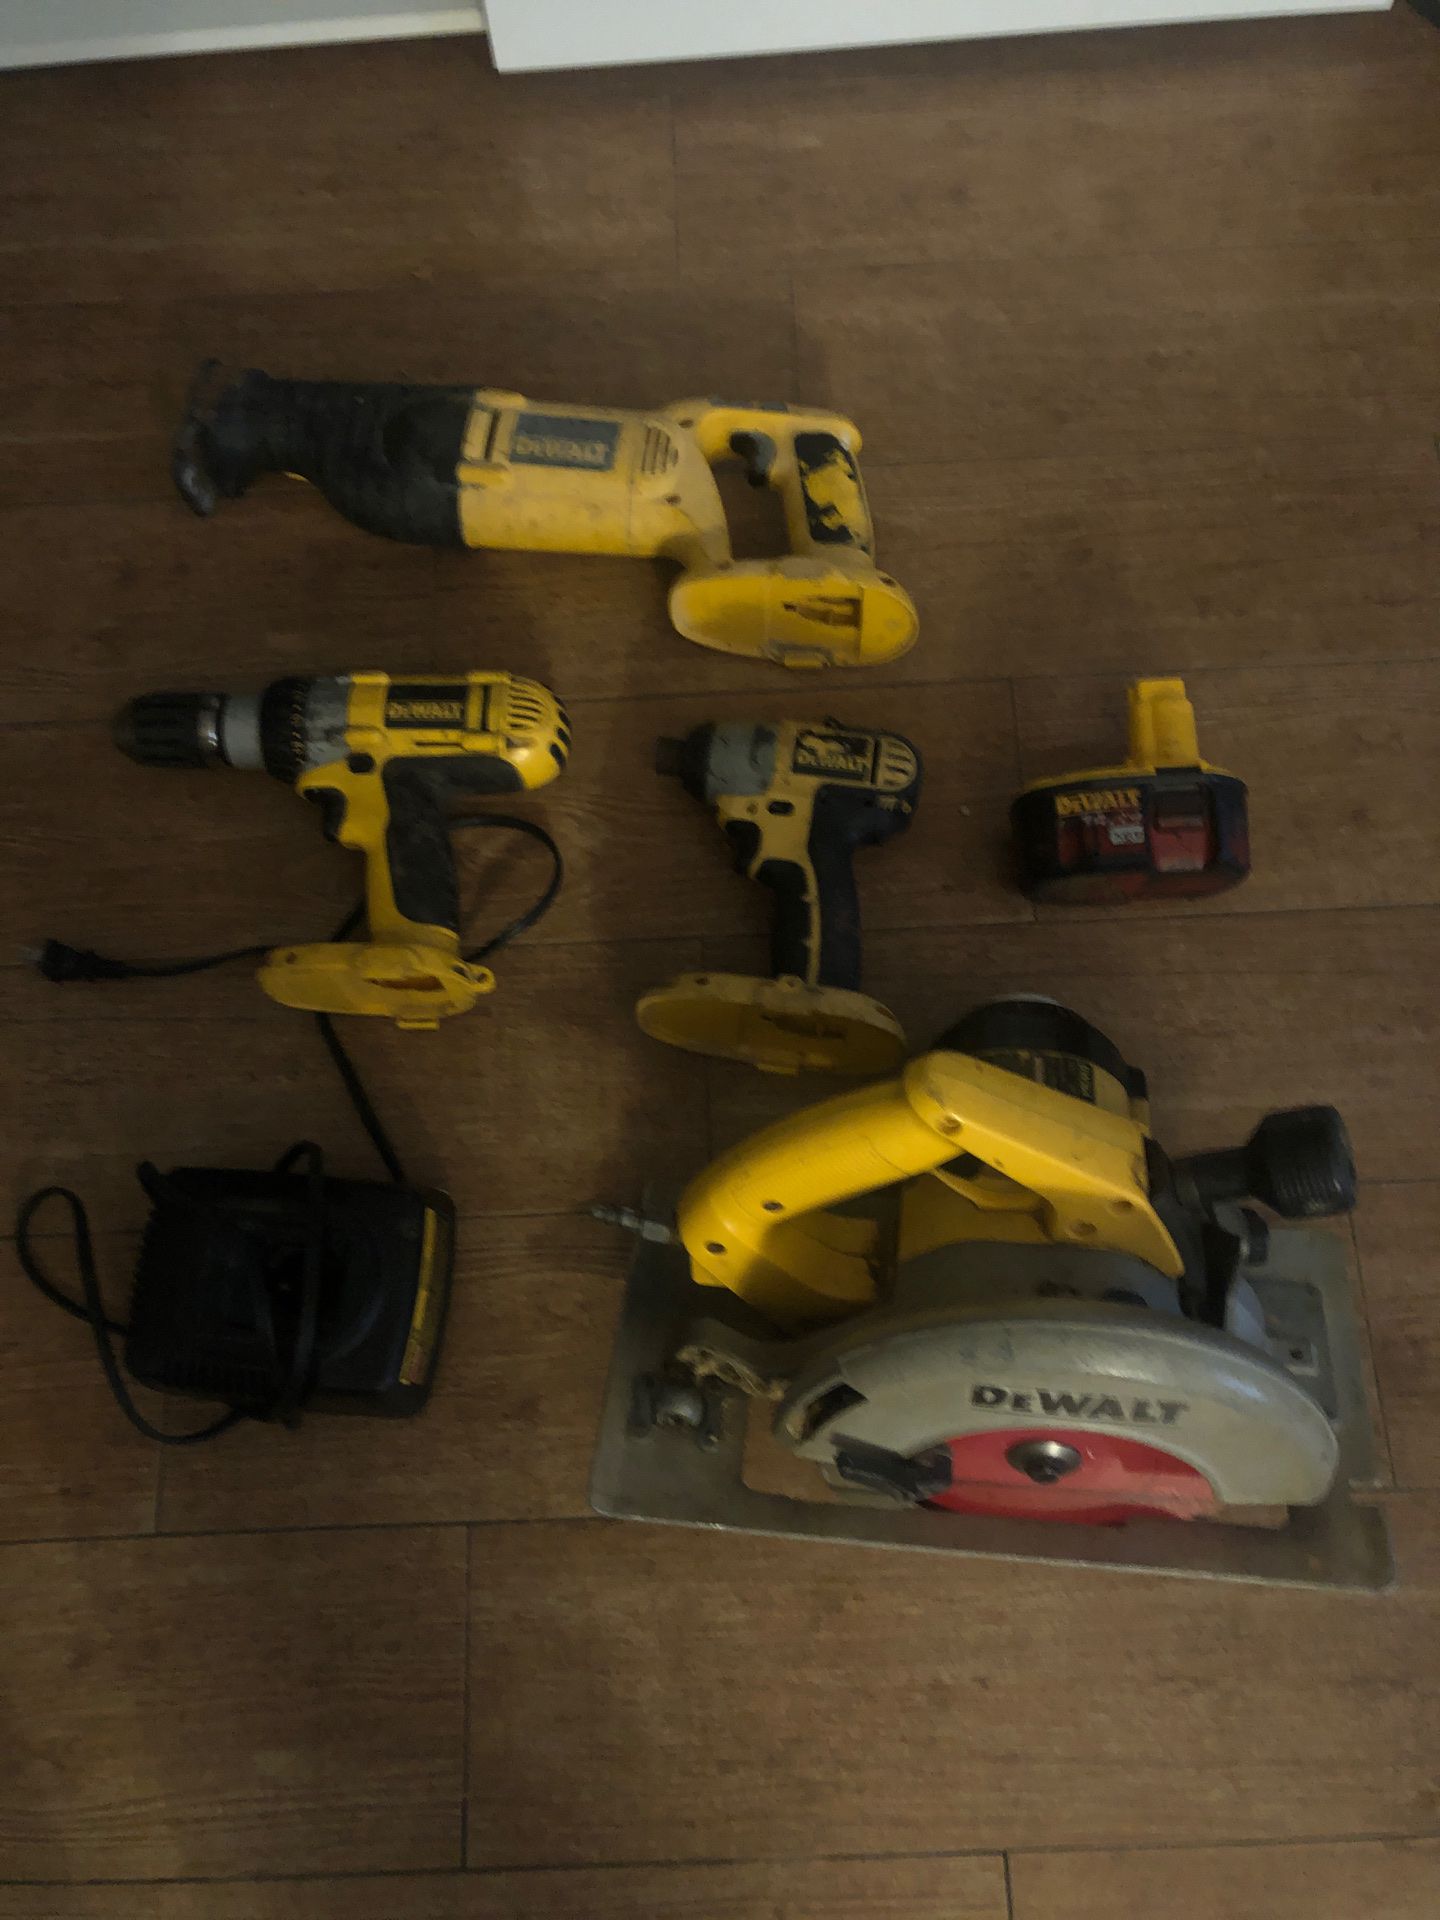 Dewalt tools (only one battery 14.4 v the impact drill and saw saw use 18 v battery, the circular saw works with compressor